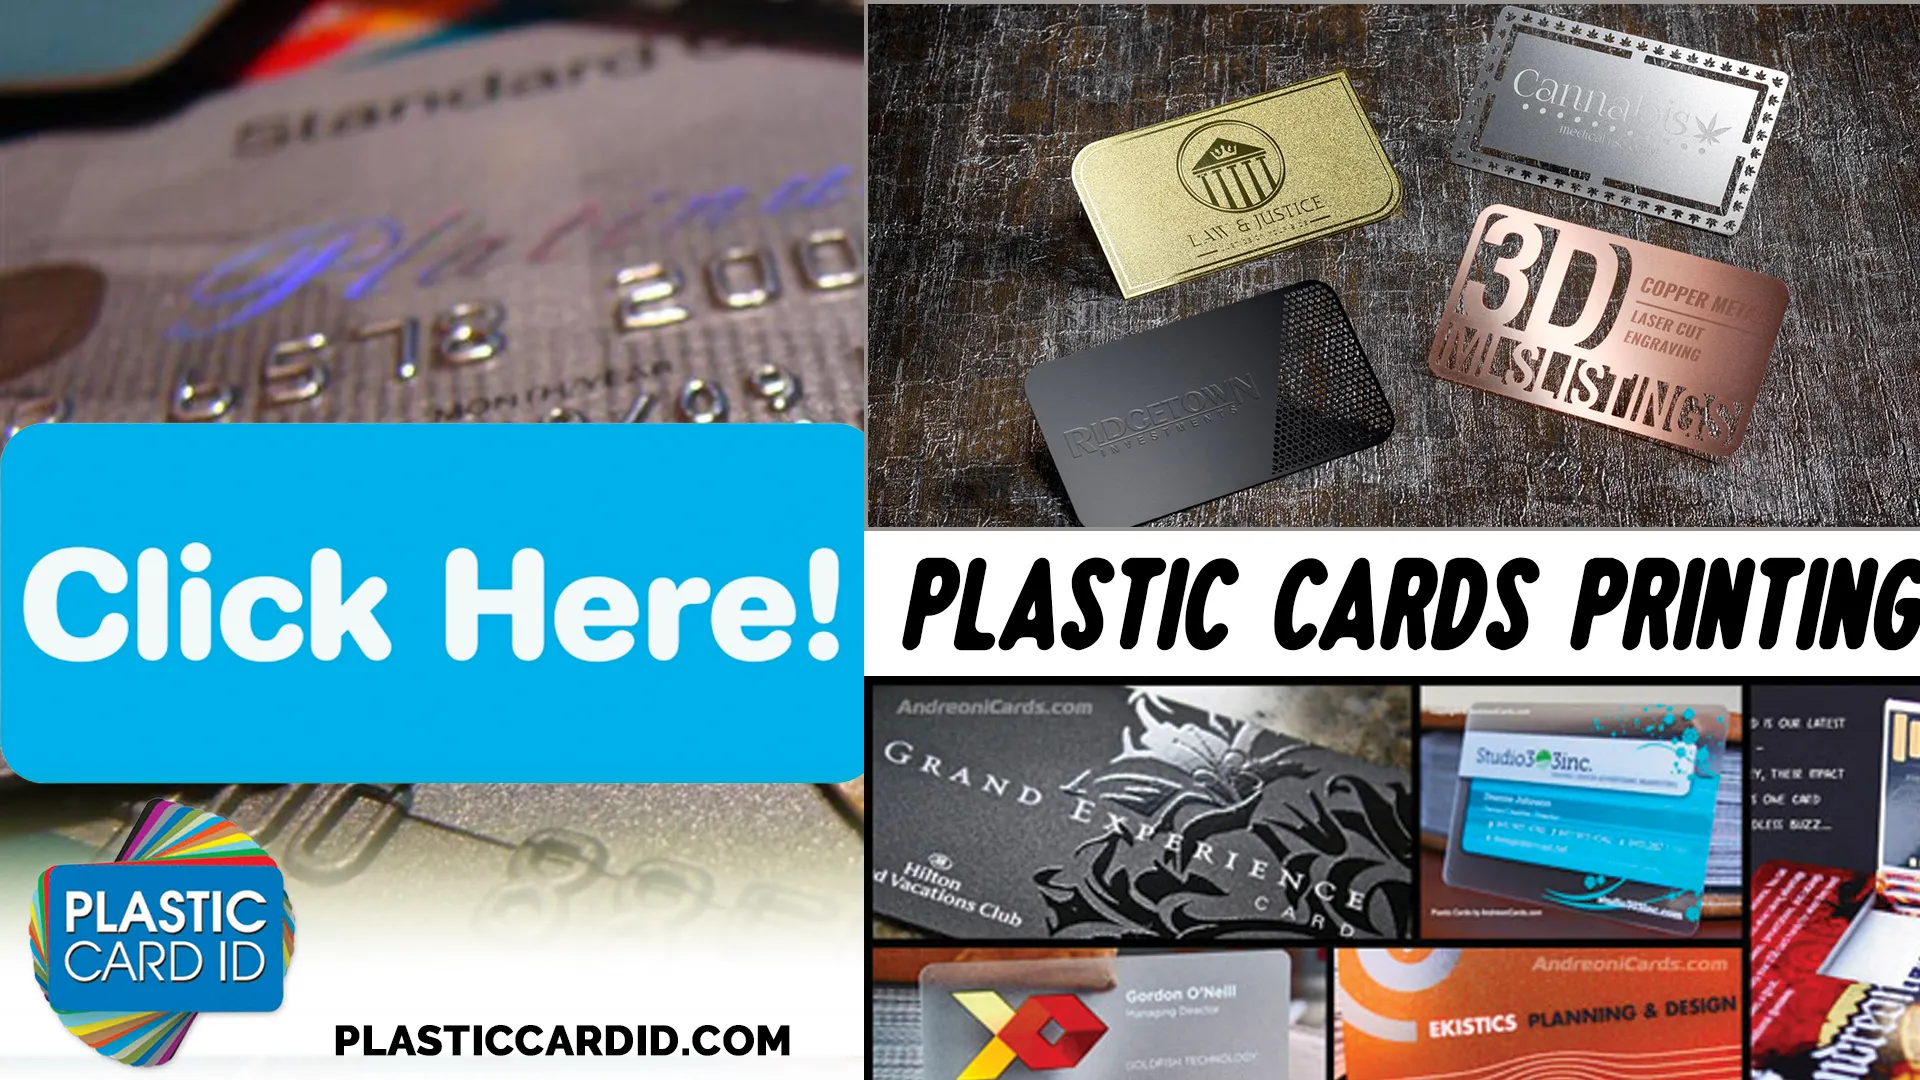 Plastic Card ID




: A Customer-Centric Approach Every Step of the Way